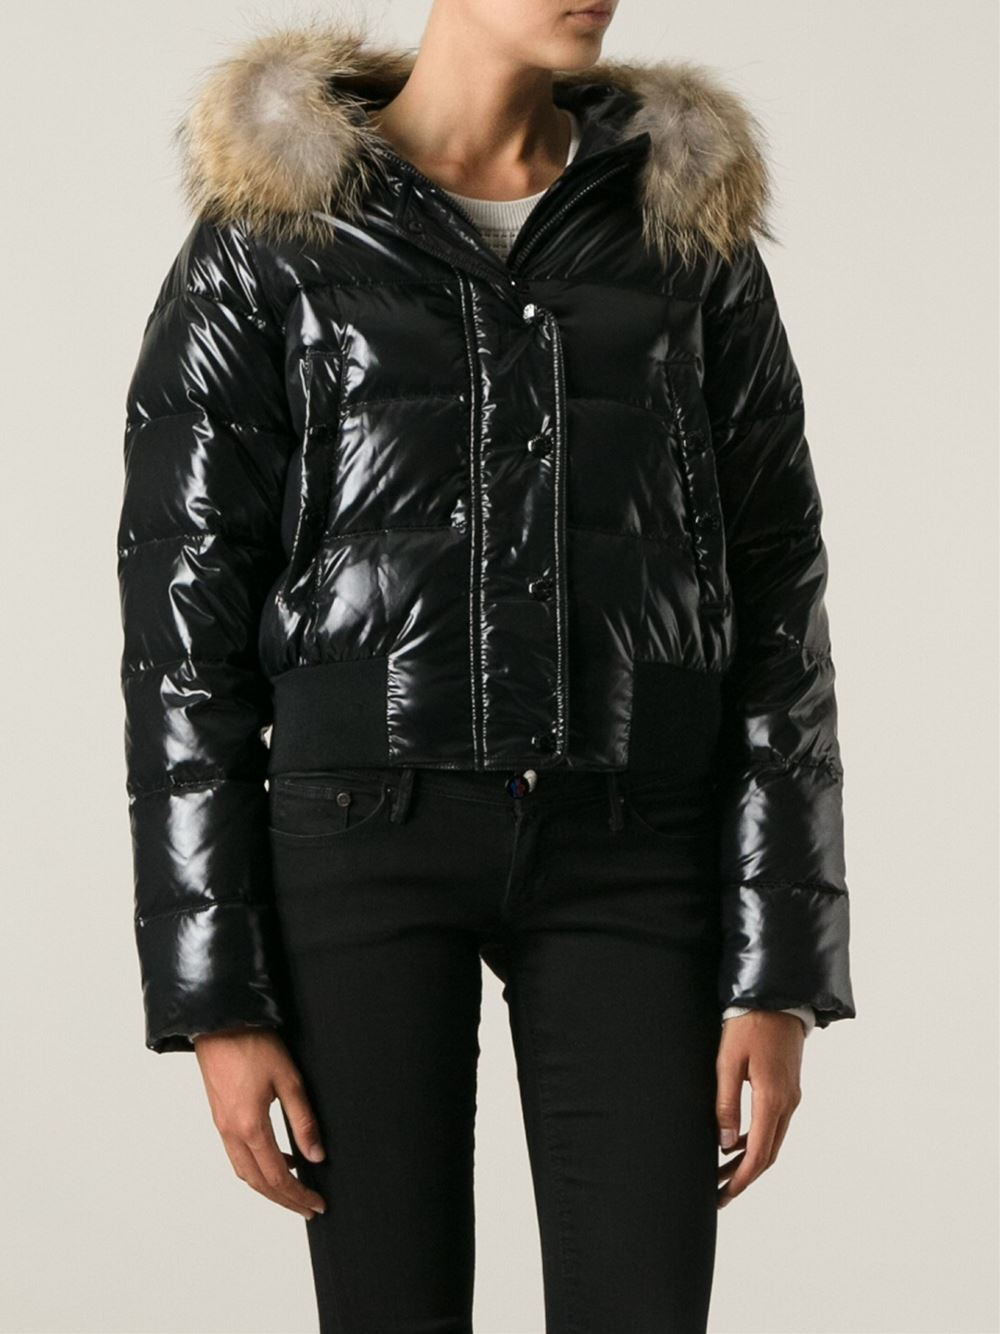 Moncler Alpin Padded Jacket in Black - Lyst